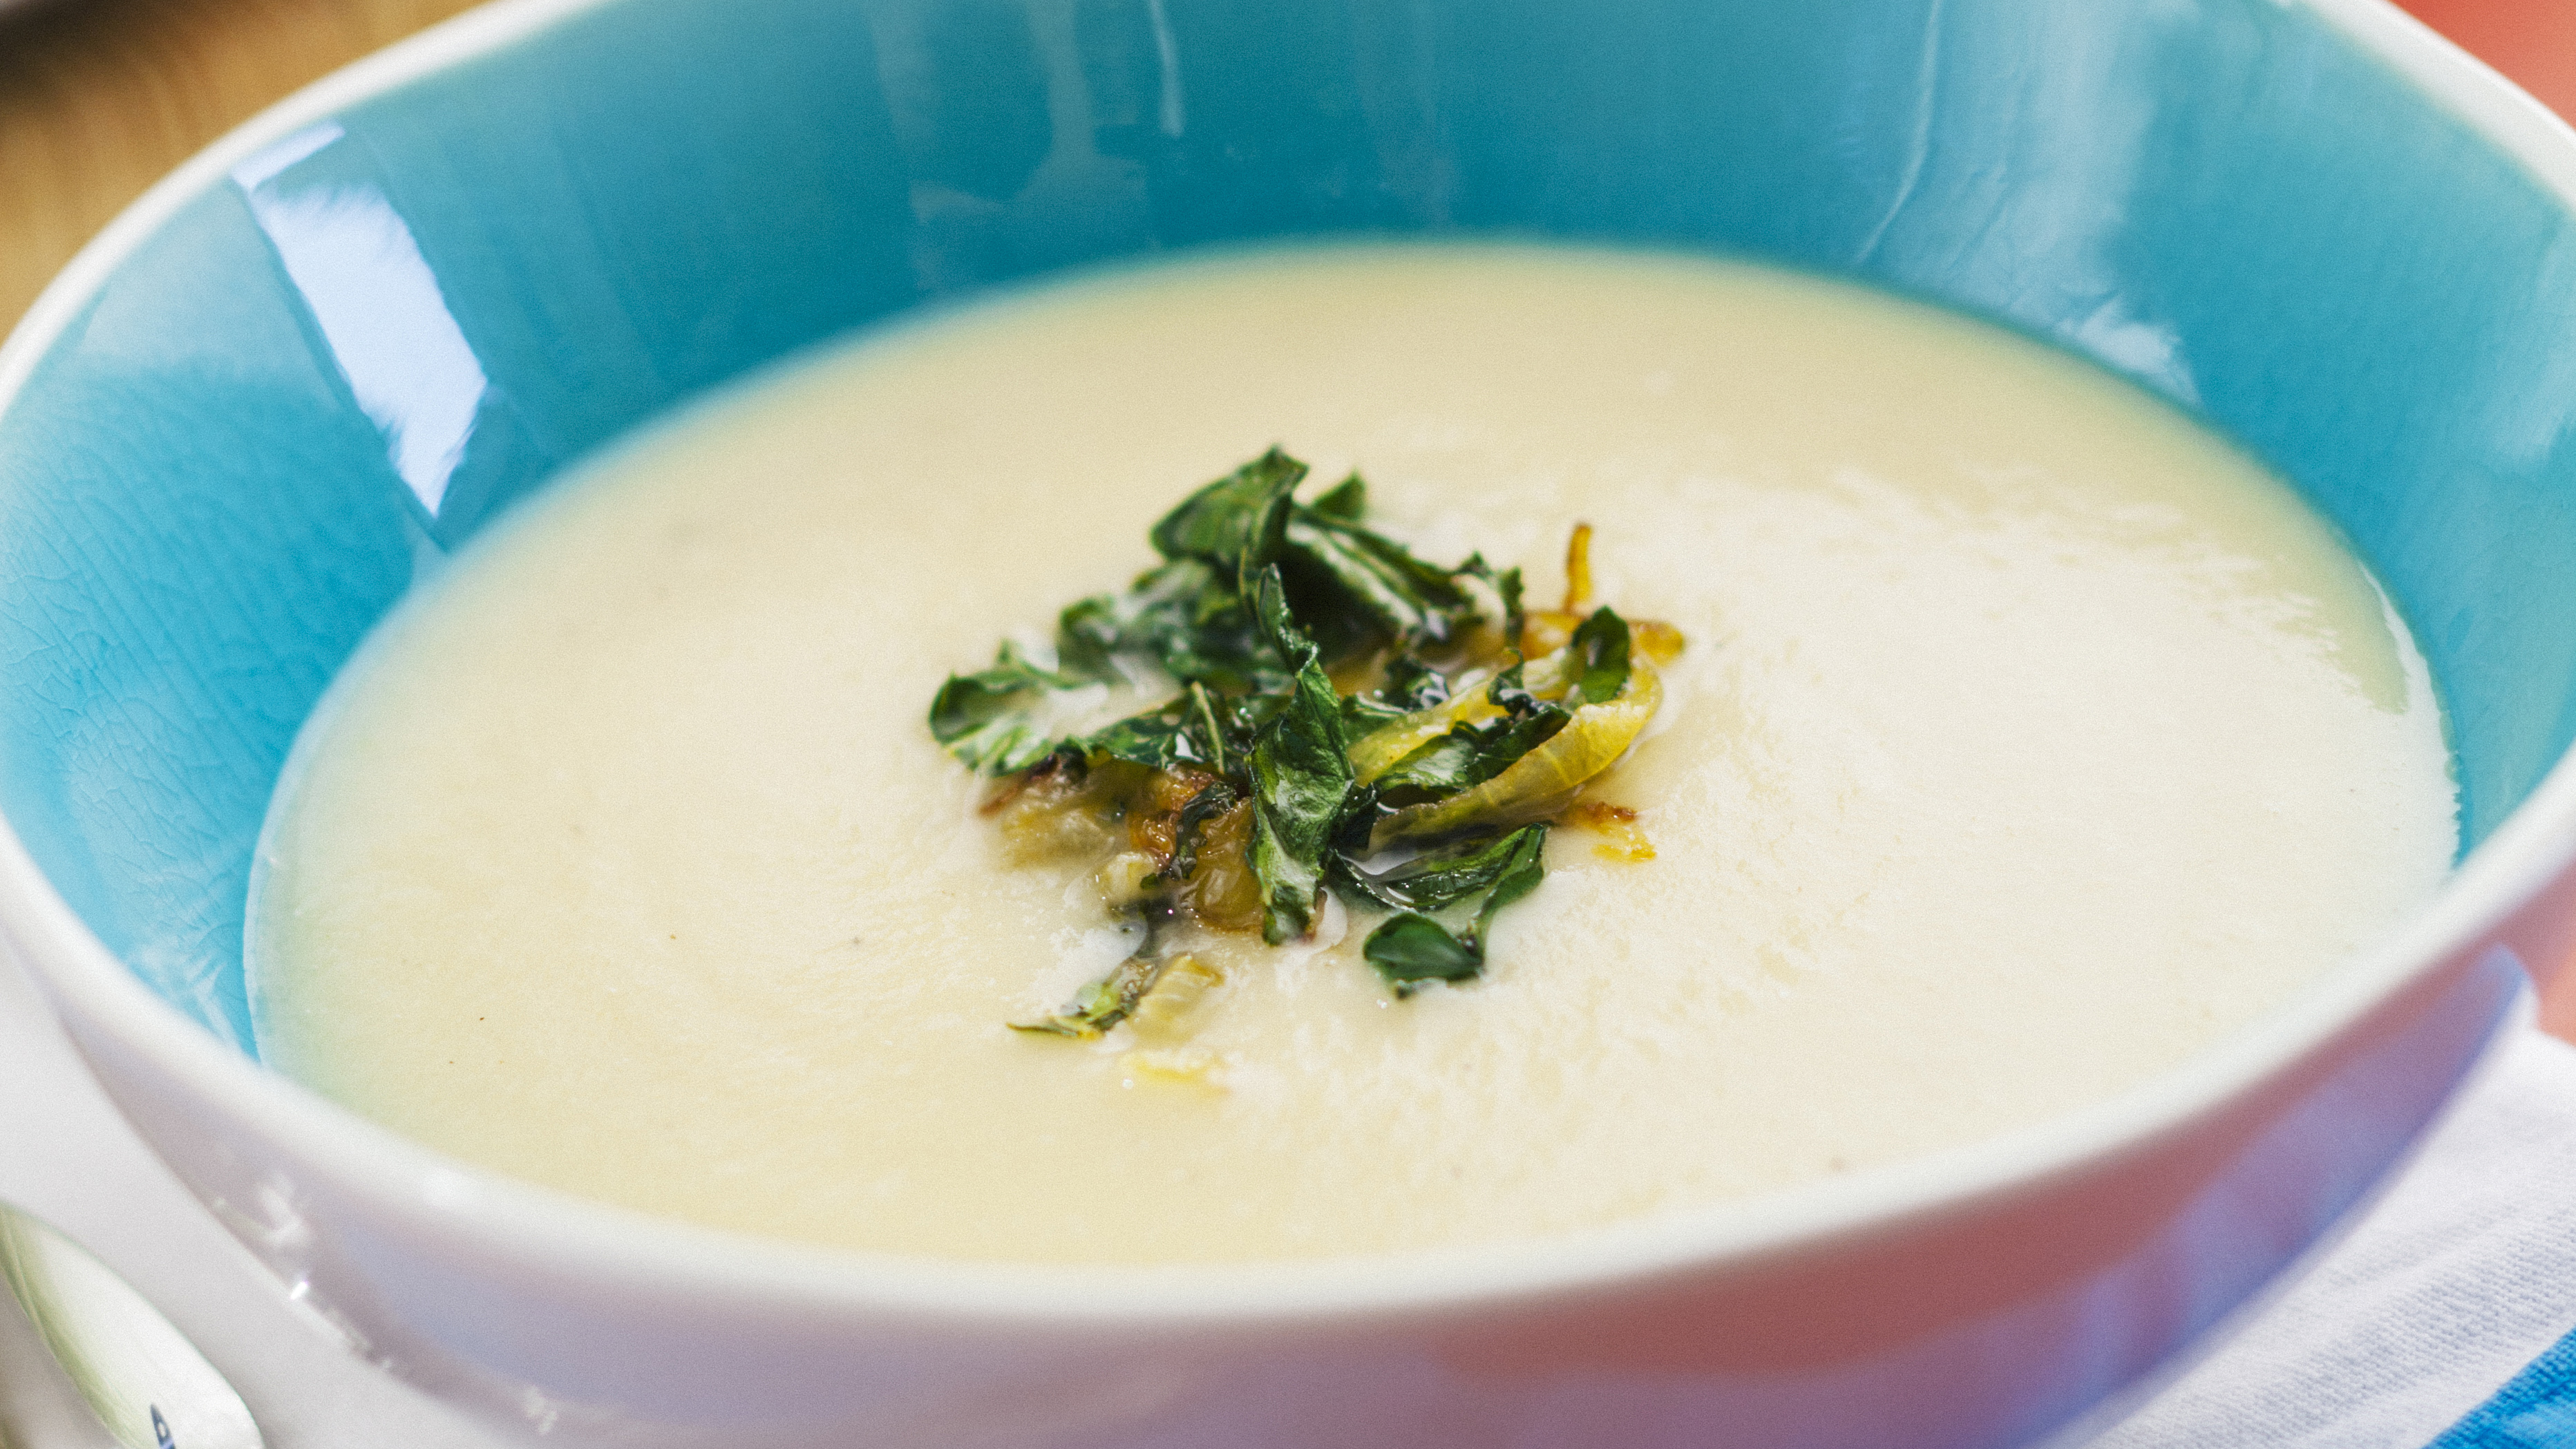 Country Magic Creamy Onion & Kale Harvest Soup by The Kilted Chef